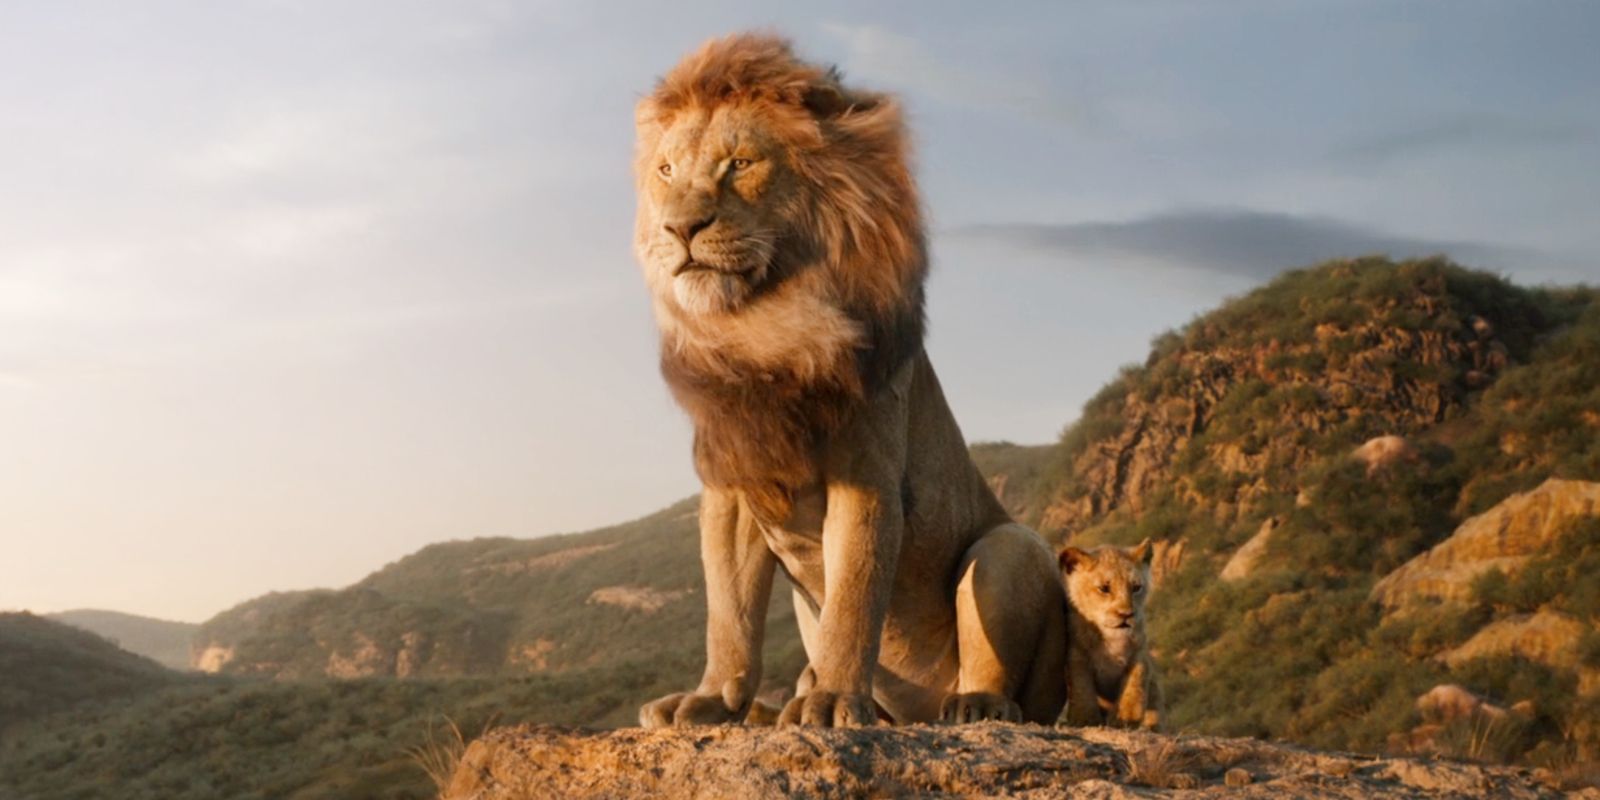 How The Lion King Prequel Will Change Mufasa Teased By Disney Movie Star